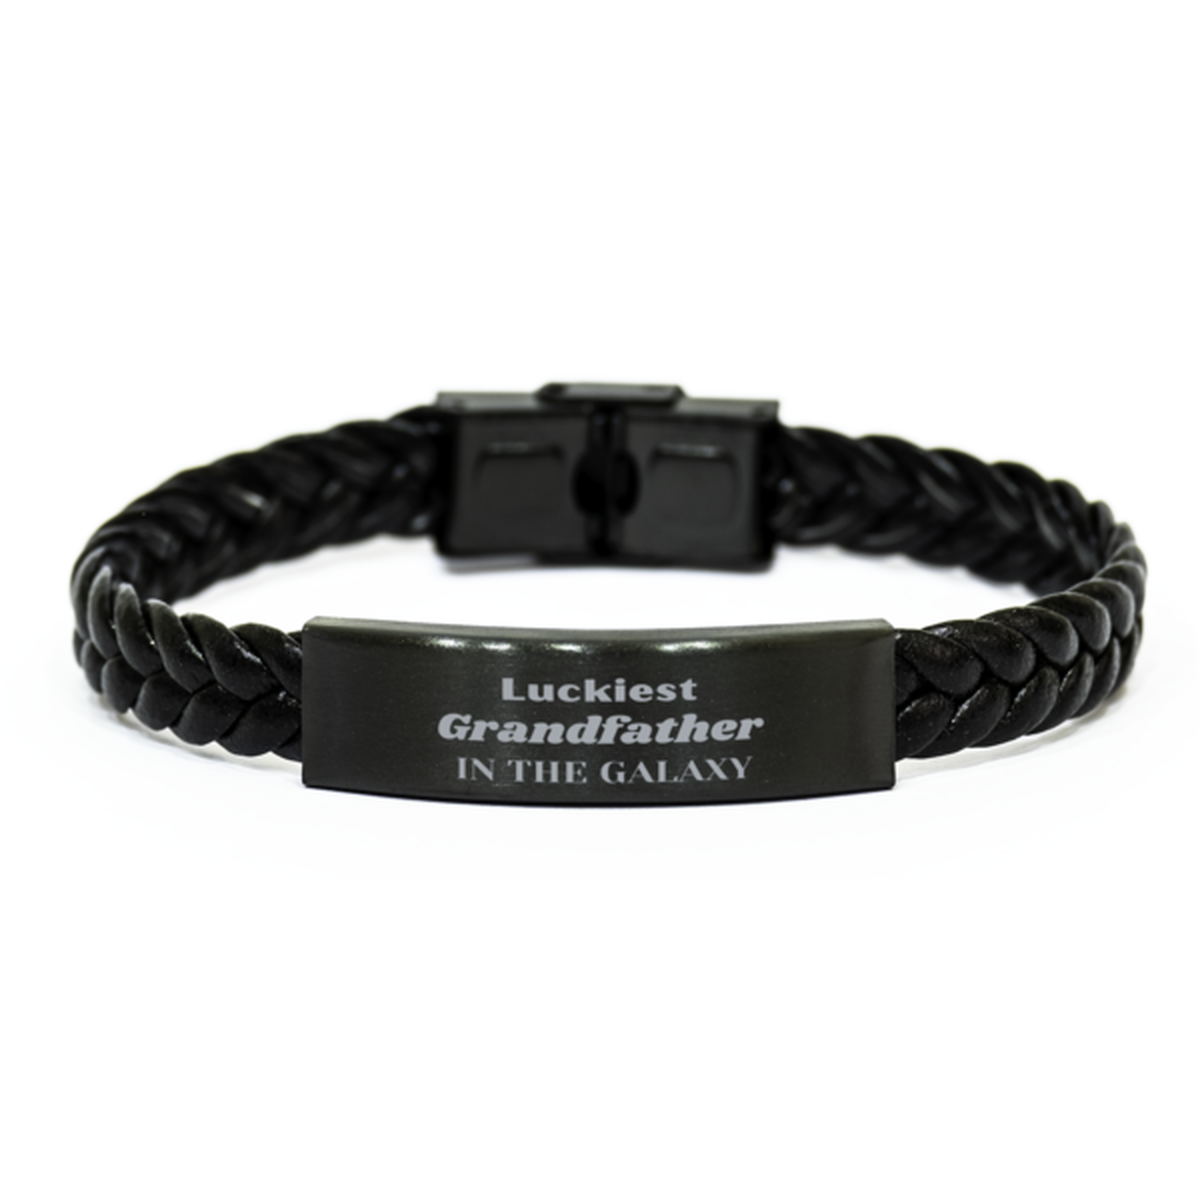 Luckiest Grandfather in the Galaxy, To My Grandfather Engraved Gifts, Christmas Grandfather Braided Leather Bracelet Gifts, X-mas Birthday Unique Gifts For Grandfather Men Women